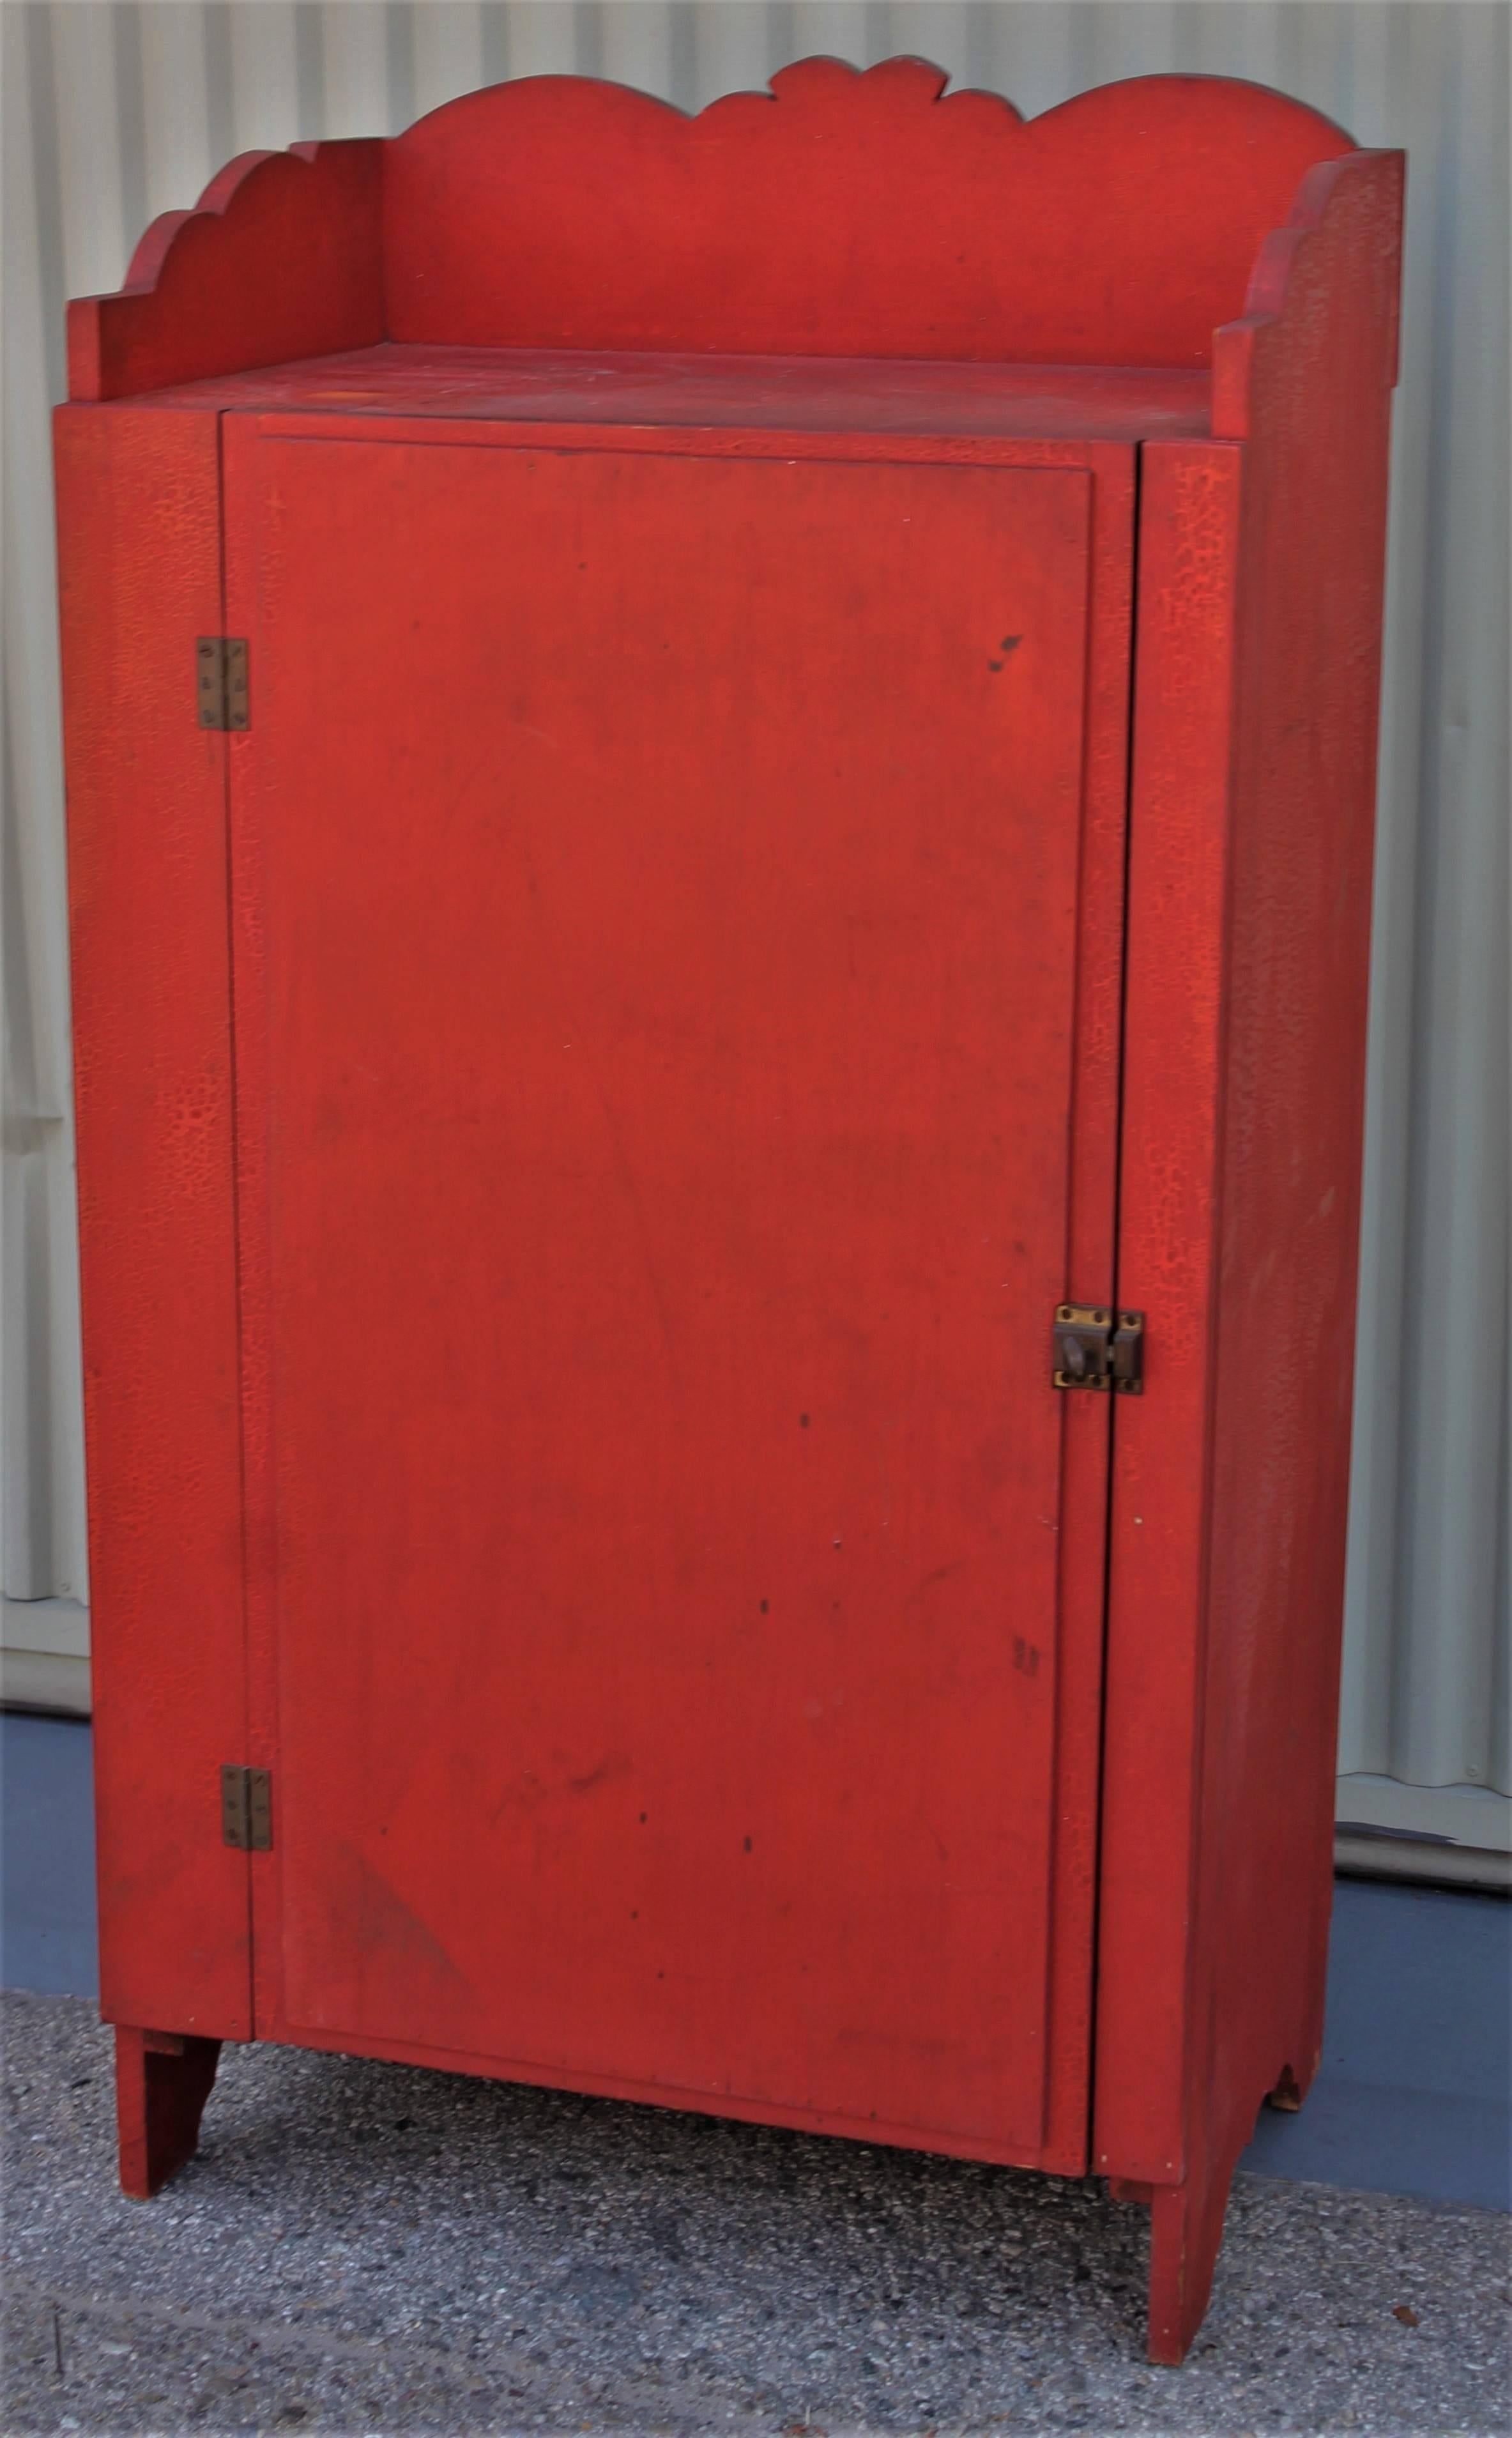 This beautiful 19th century tomato red / orange one door wall cupboard has one door and many shelf's inside. Fancy cut-out and nice details. This is in very good condition with a wonderful alligatored painted surface.